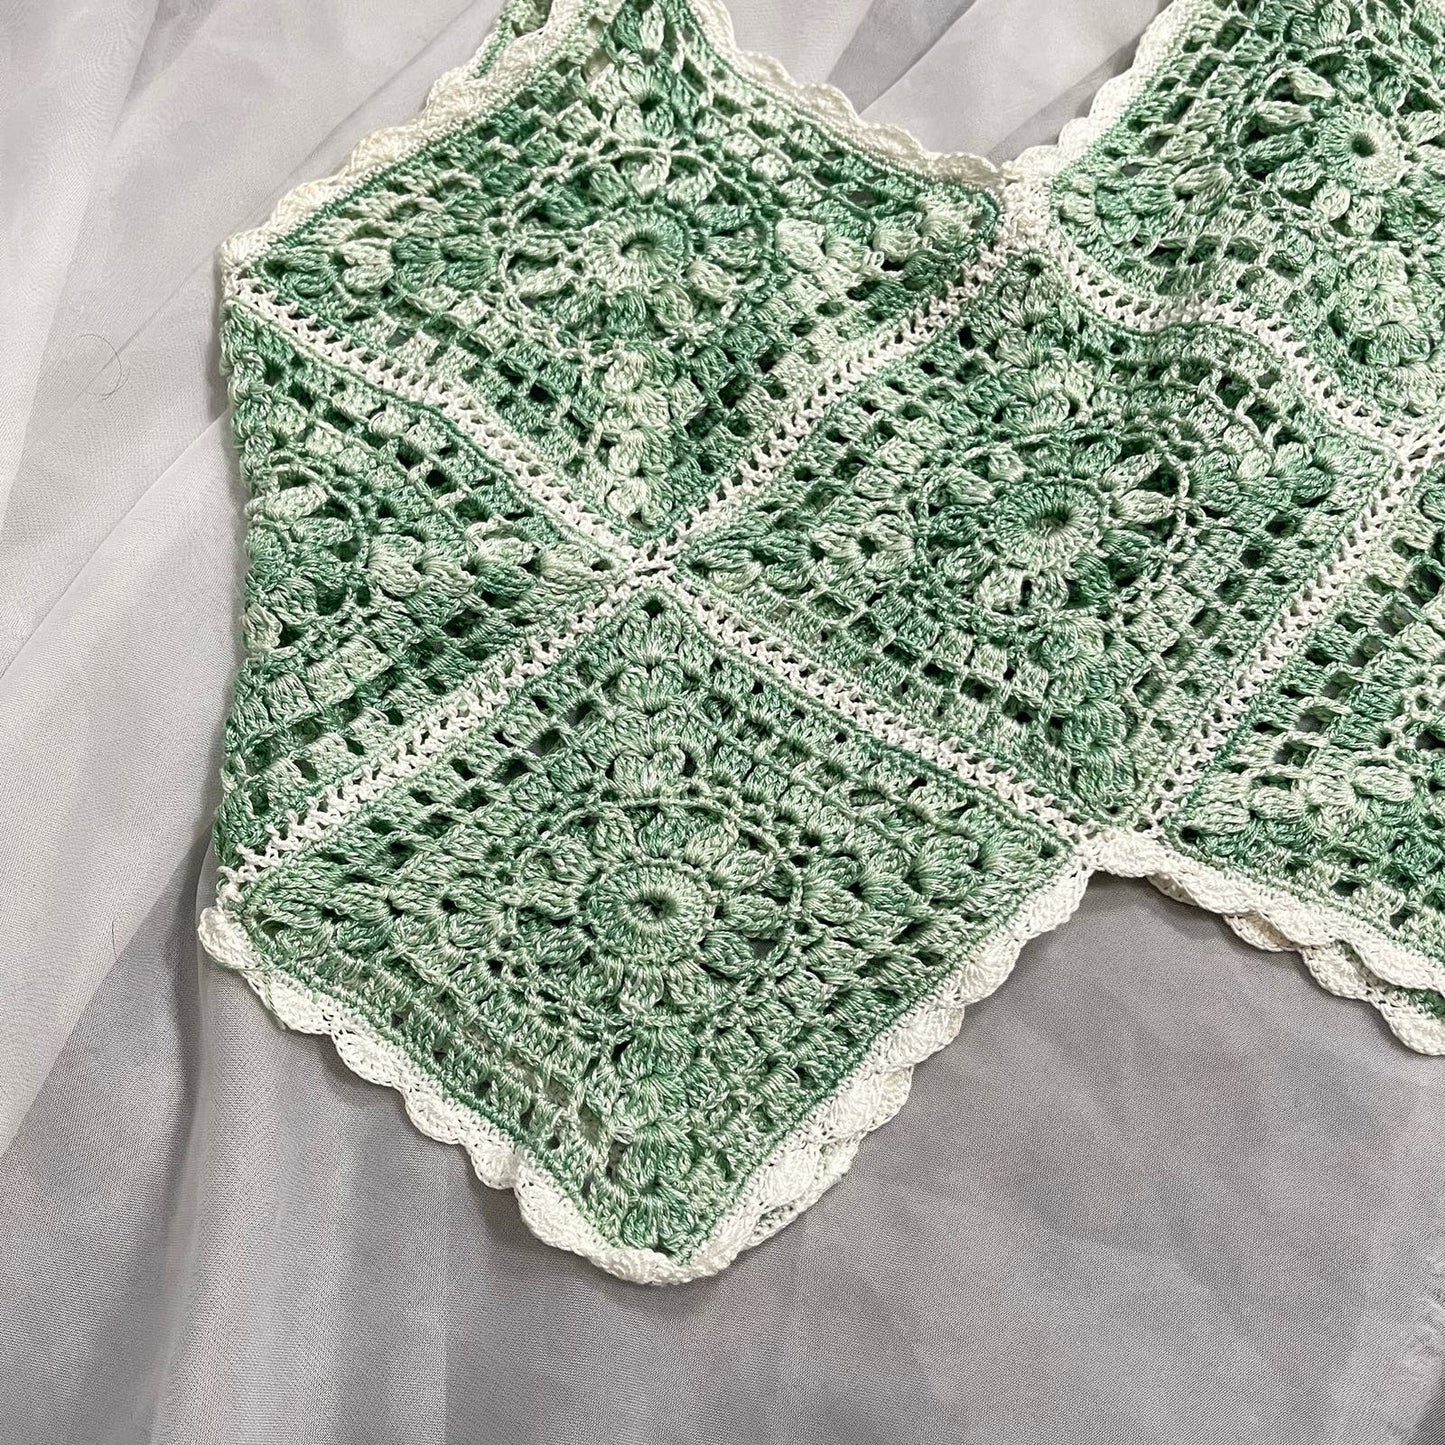 Handmade crochet cami top with vintage fabrics. Pastel green and white (XS-S)